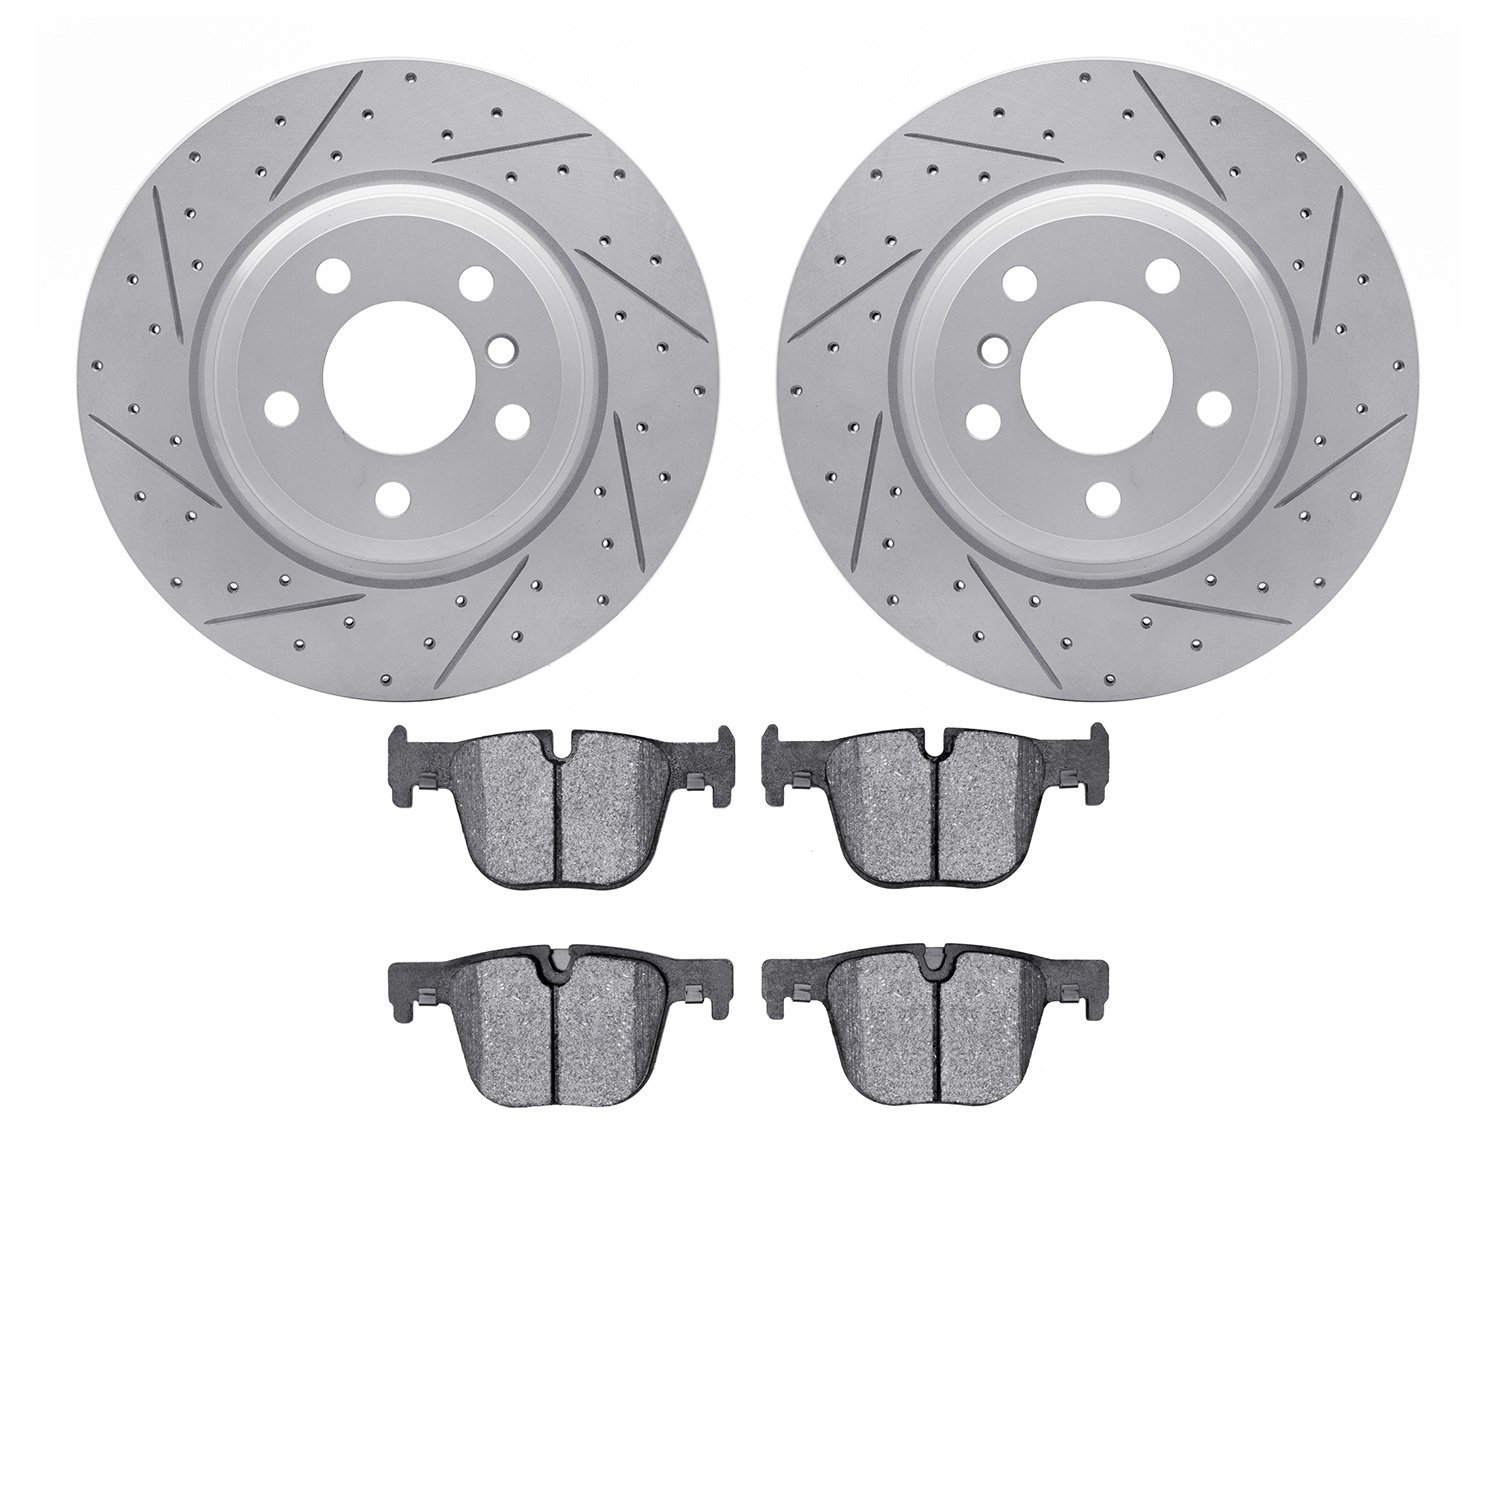 2502-31093 Geoperformance Drilled/Slotted Rotors w/5000 Advanced Brake Pads Kit, 2012-2020 BMW, Position: Rear